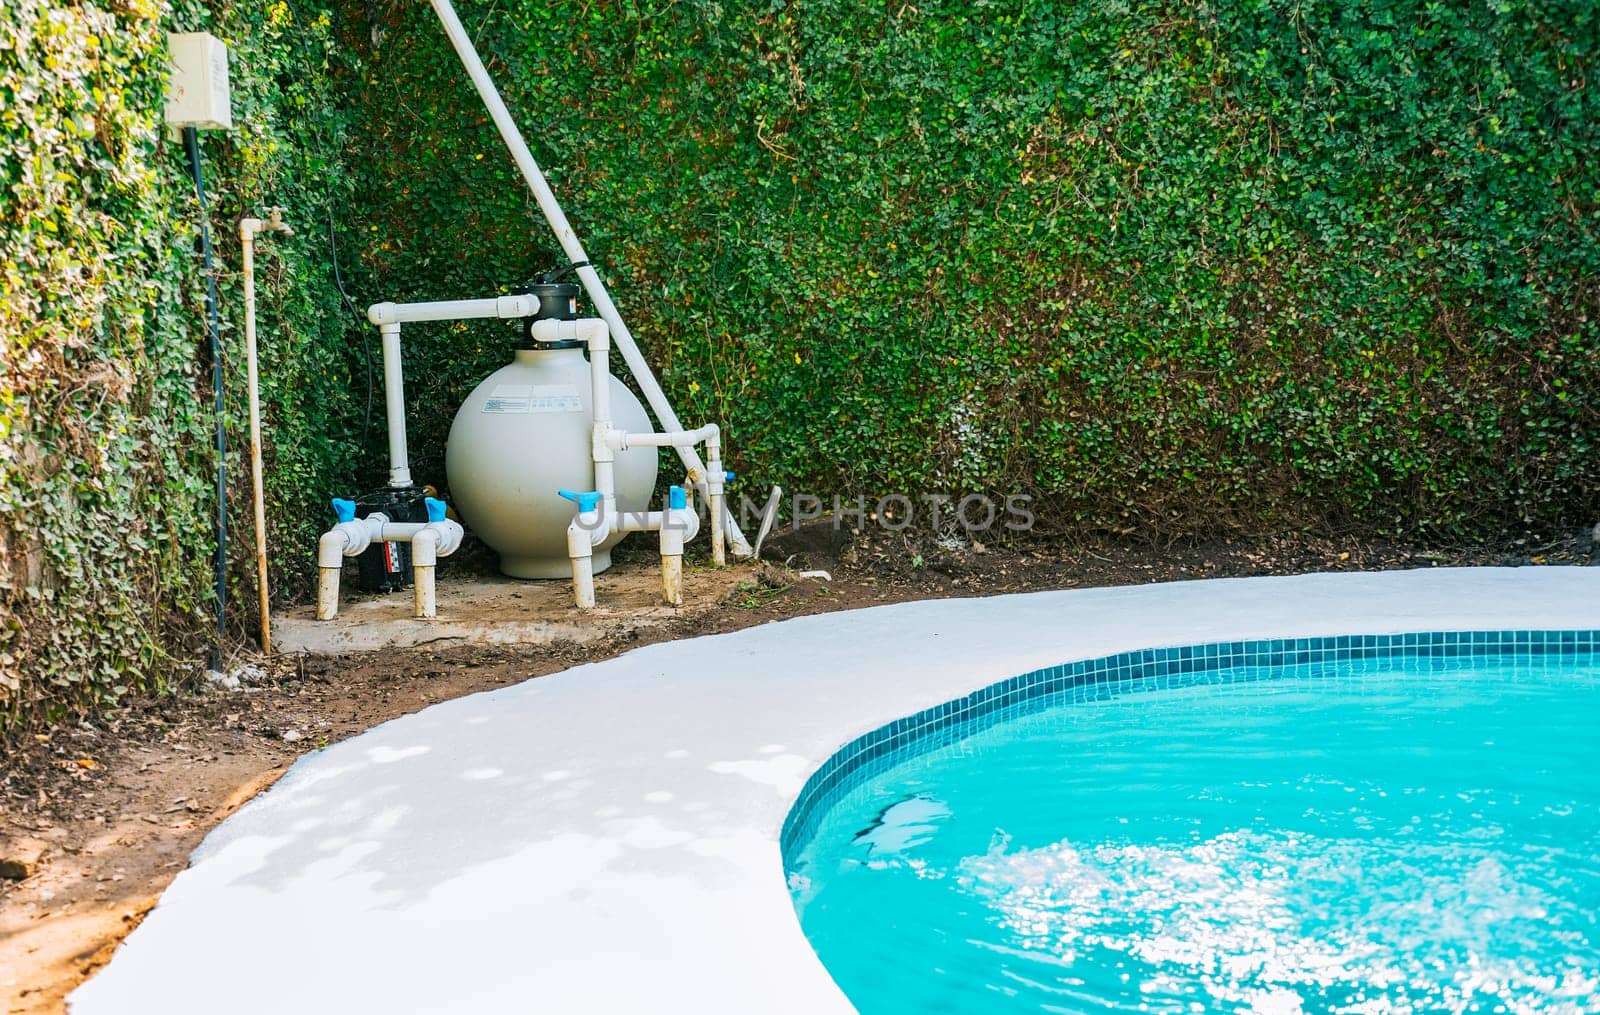 Pool pump with sand filter installed near of swimming pool. Home swimming pool filter and treatment plant installed. Pool purification and maintenance system by isaiphoto